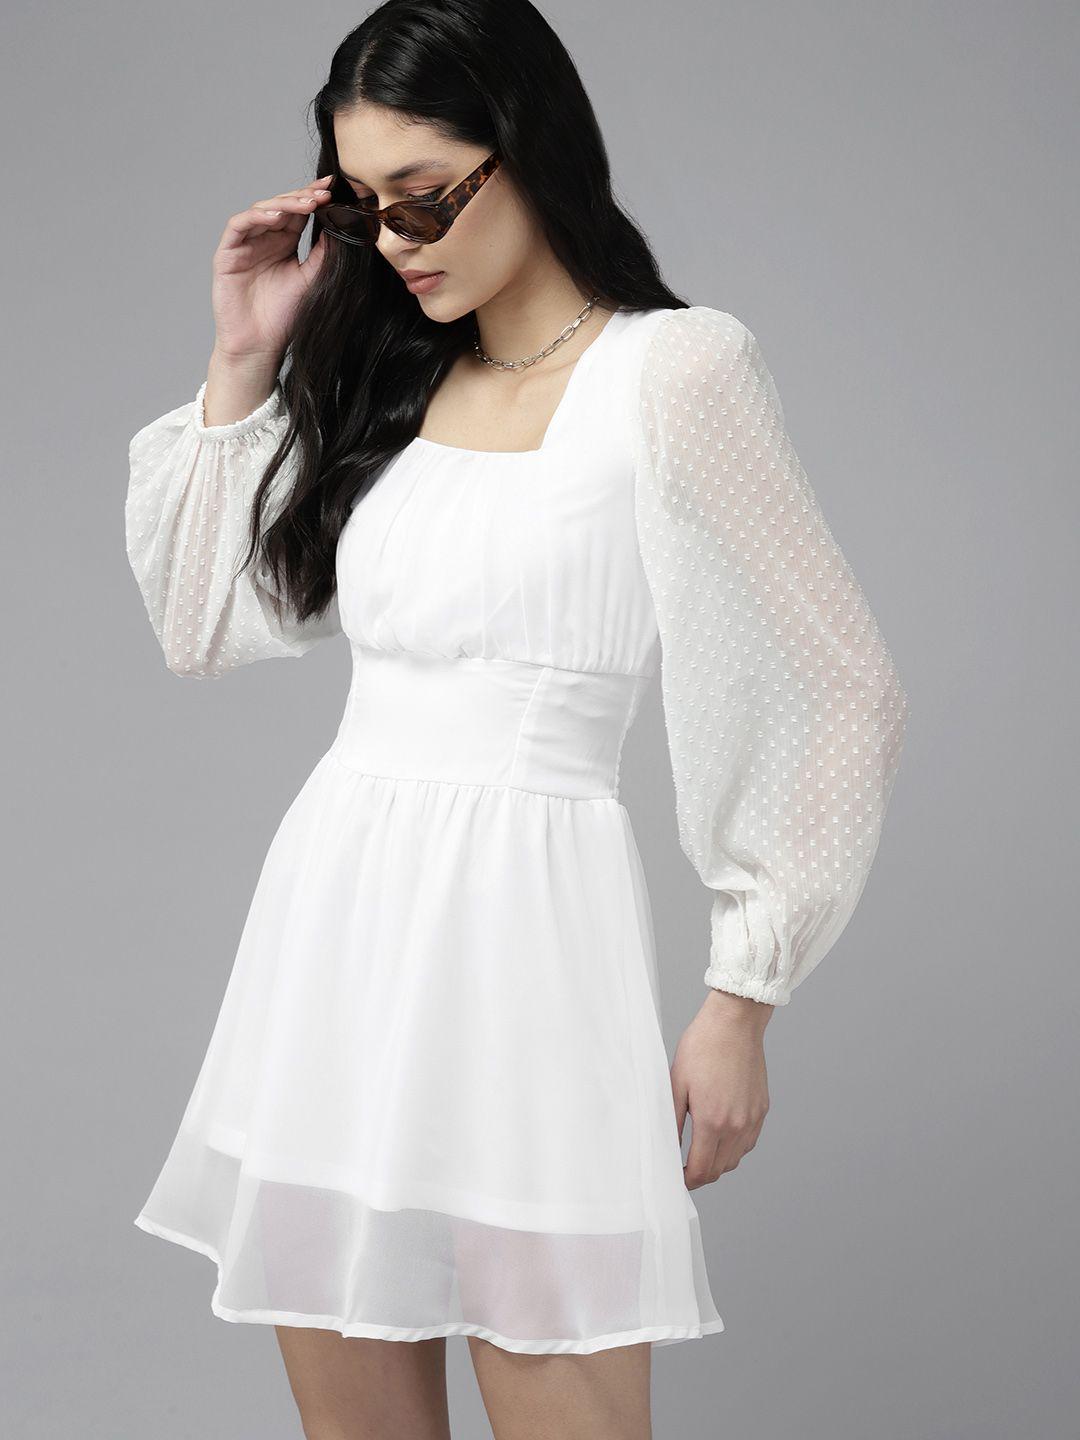 the roadster lifestyle co. square neck smocked fit and flare dress